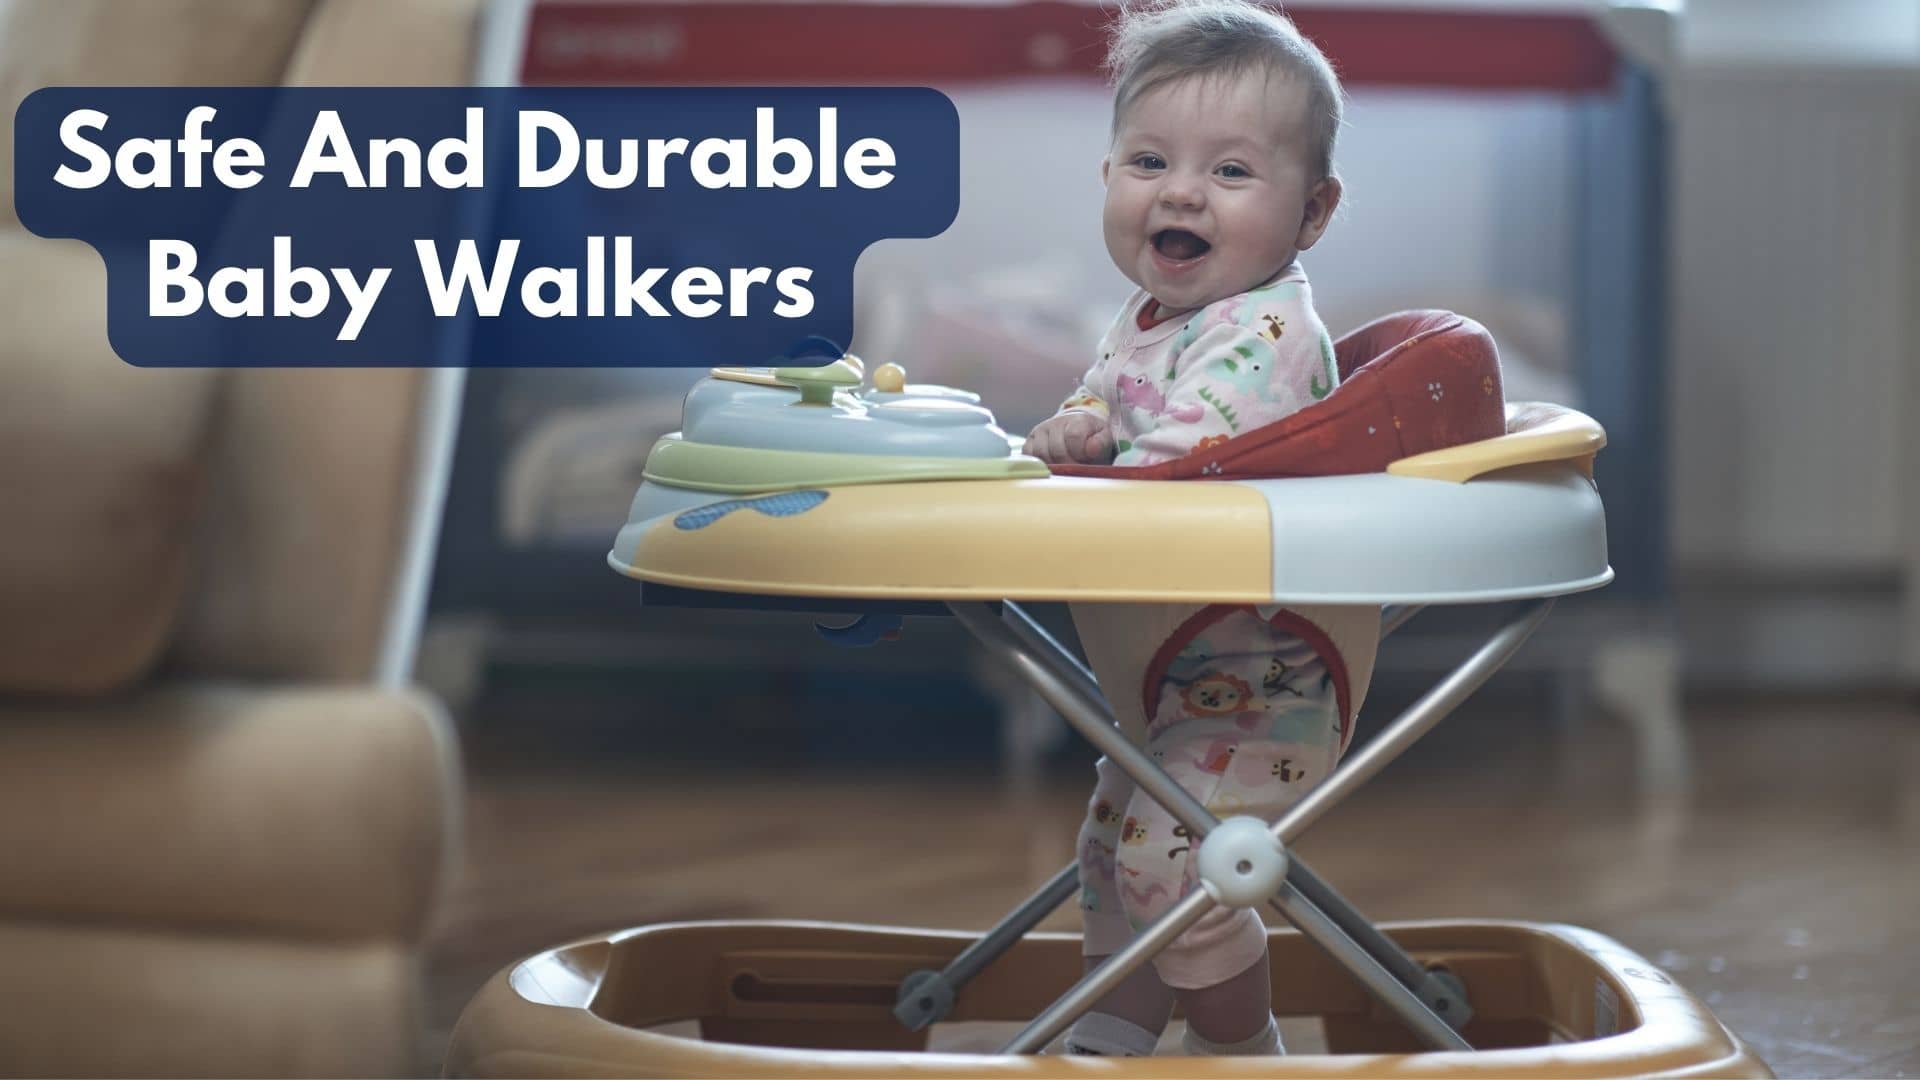 How Do I Choose Safe And Durable Baby Walkers?